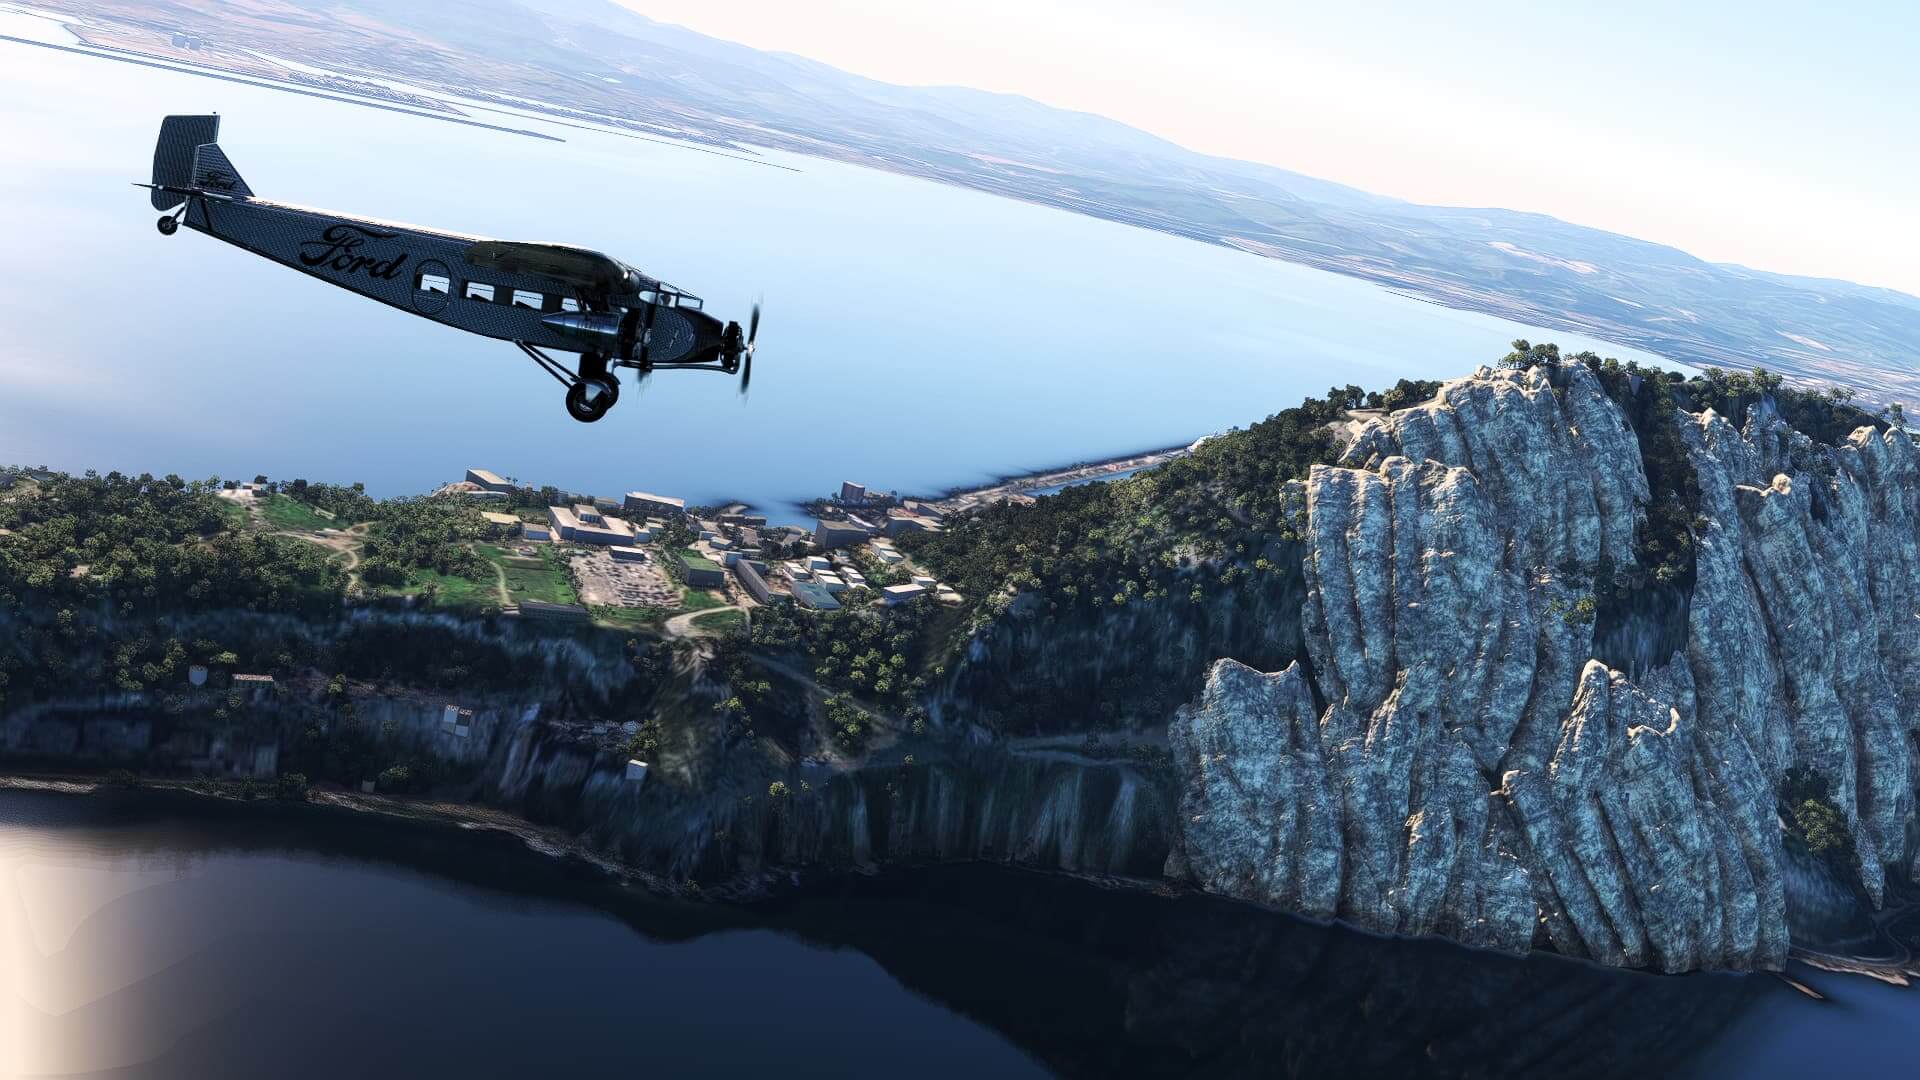 The Ford Tri-Motor cruises next to an island with rocky terrain in view off of the left wing